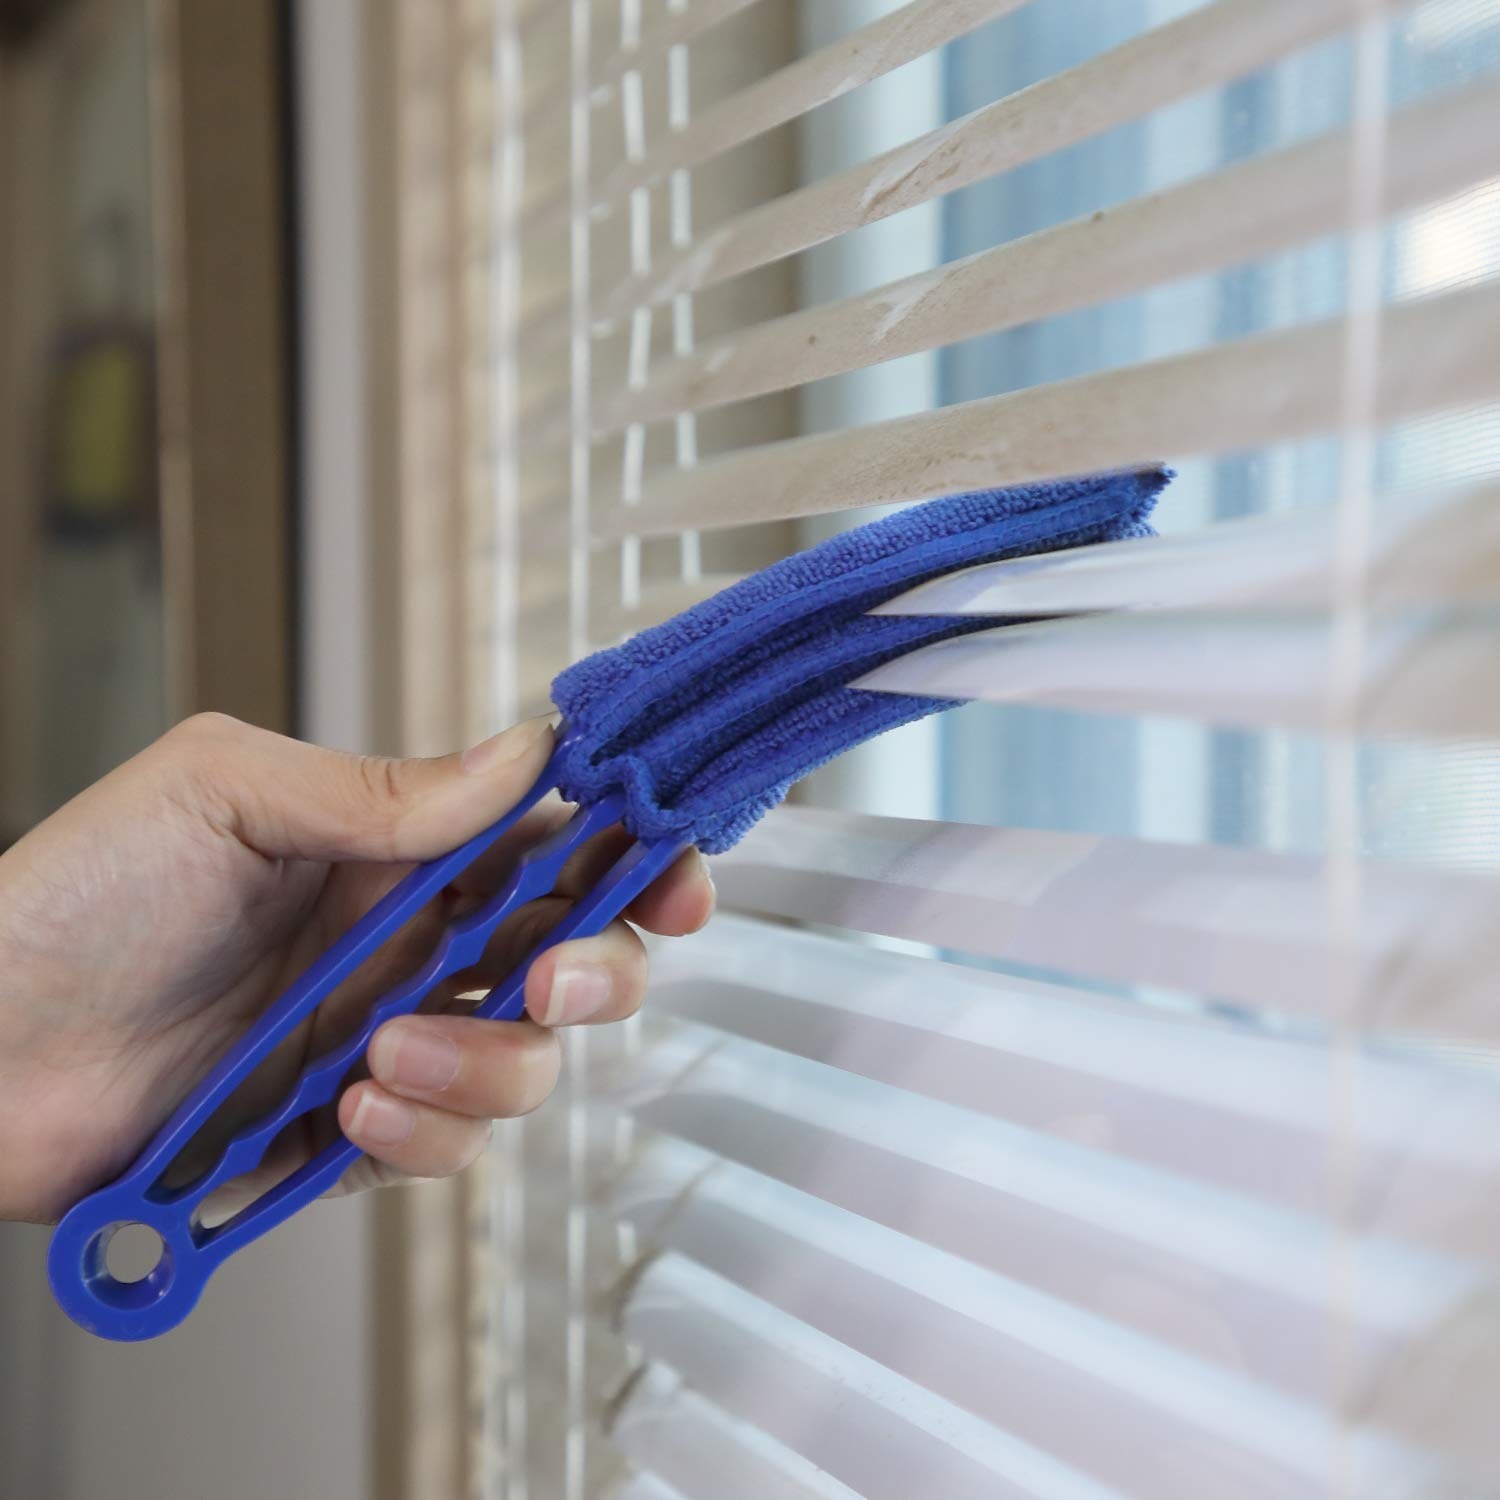 A hand using the duster on blinds